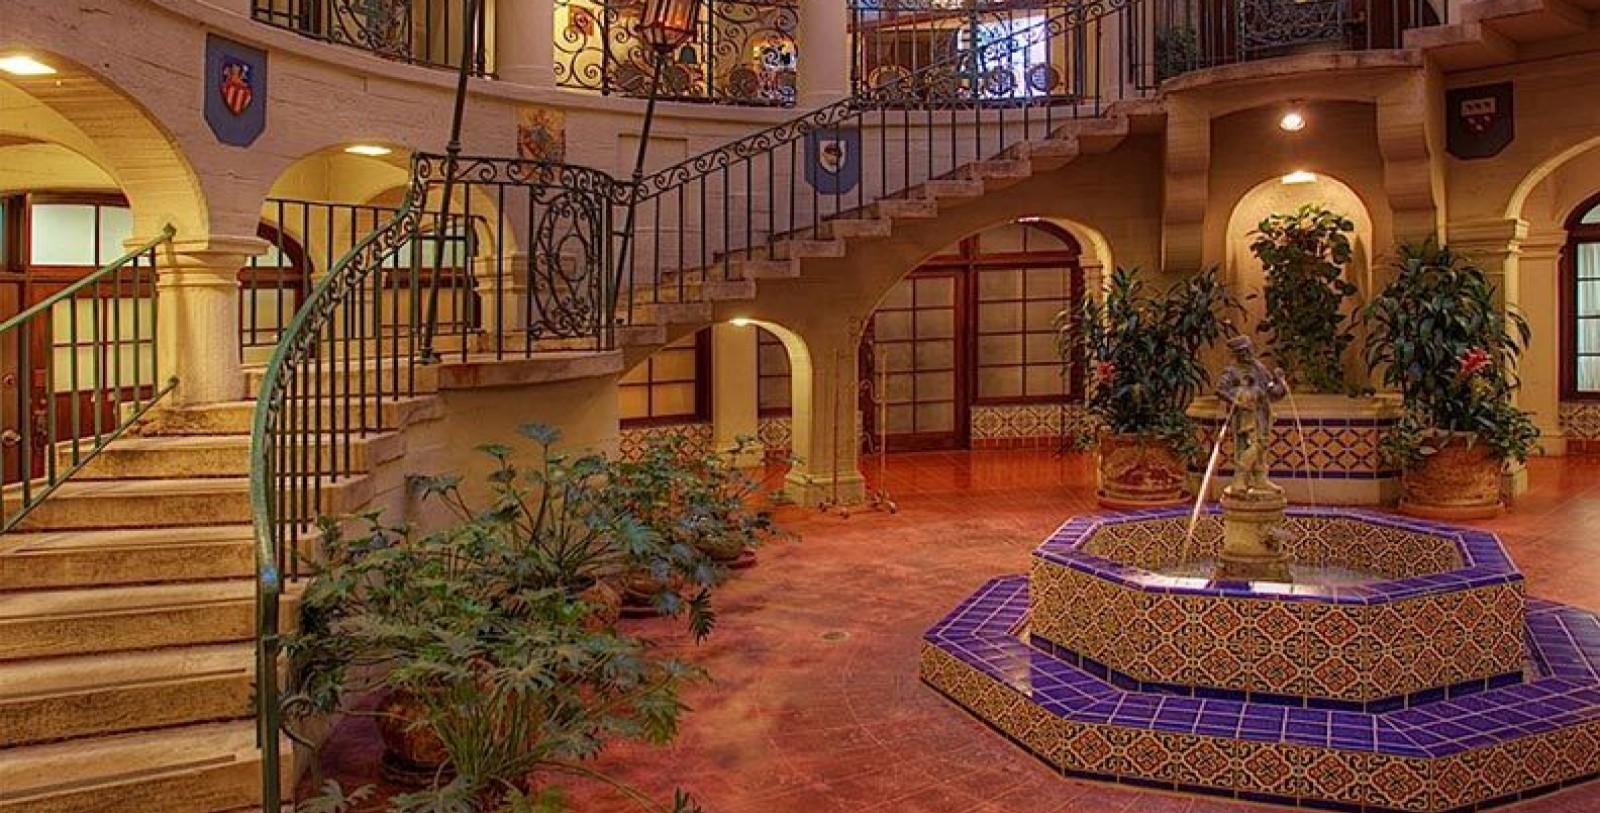 Explore The Mission Inn Museum with a docent-led tour.